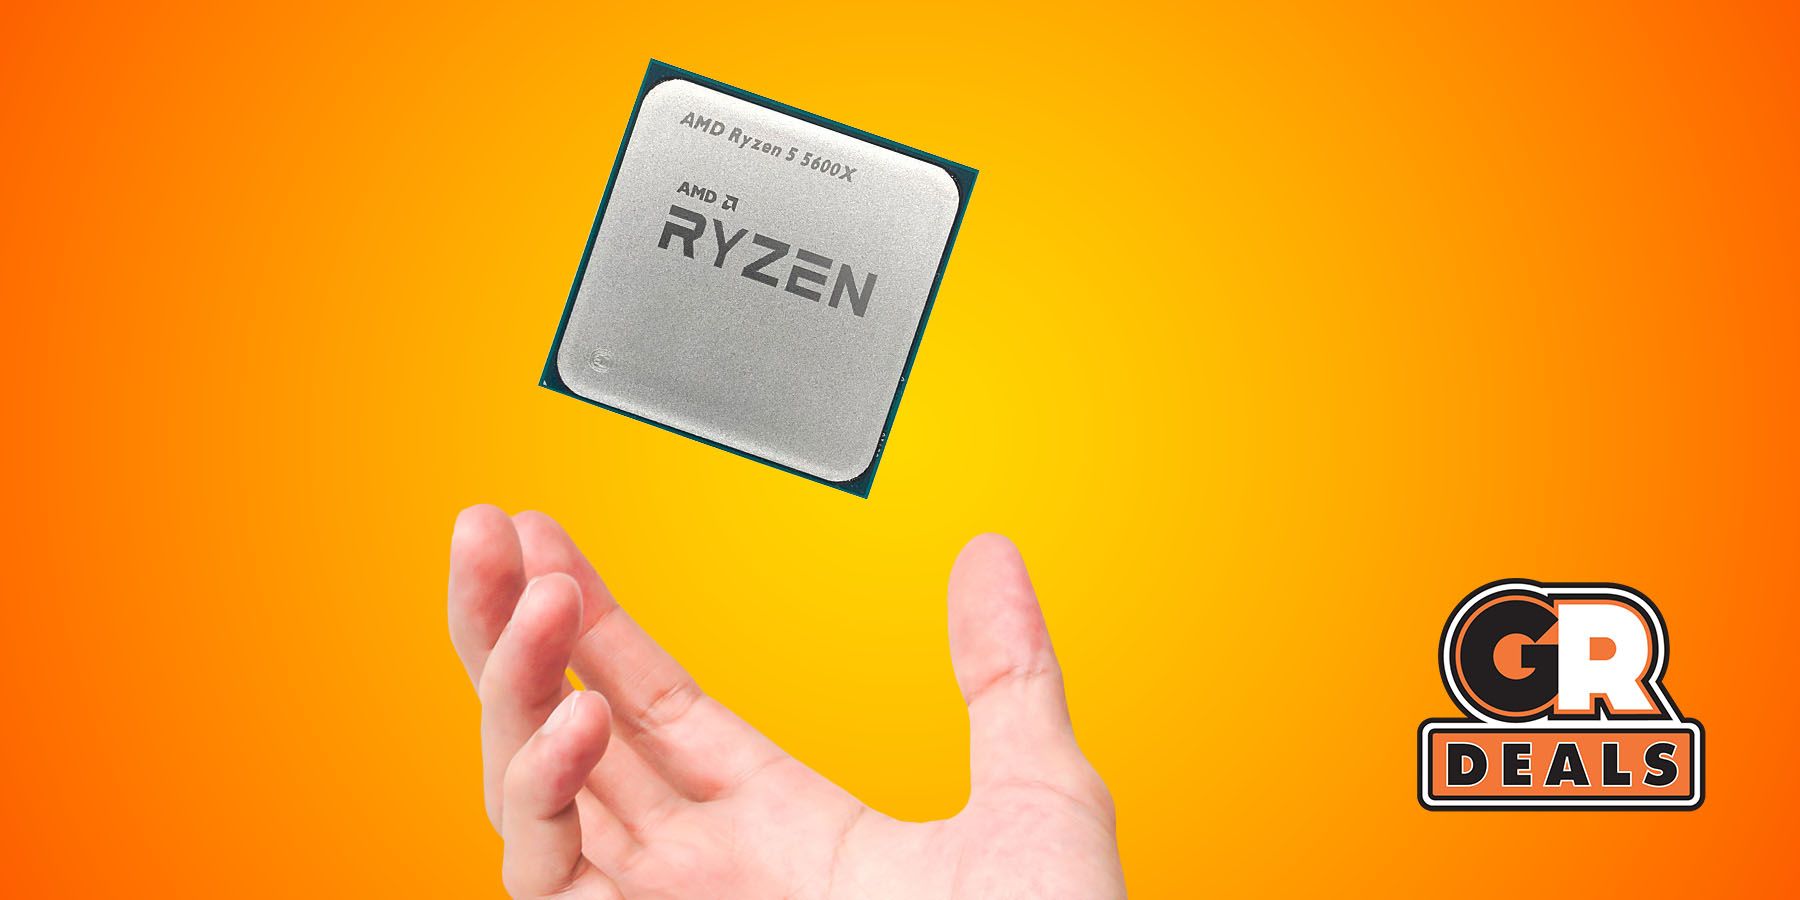 Get the AMD Ryzen 5 5600X CPU for Only $148.99